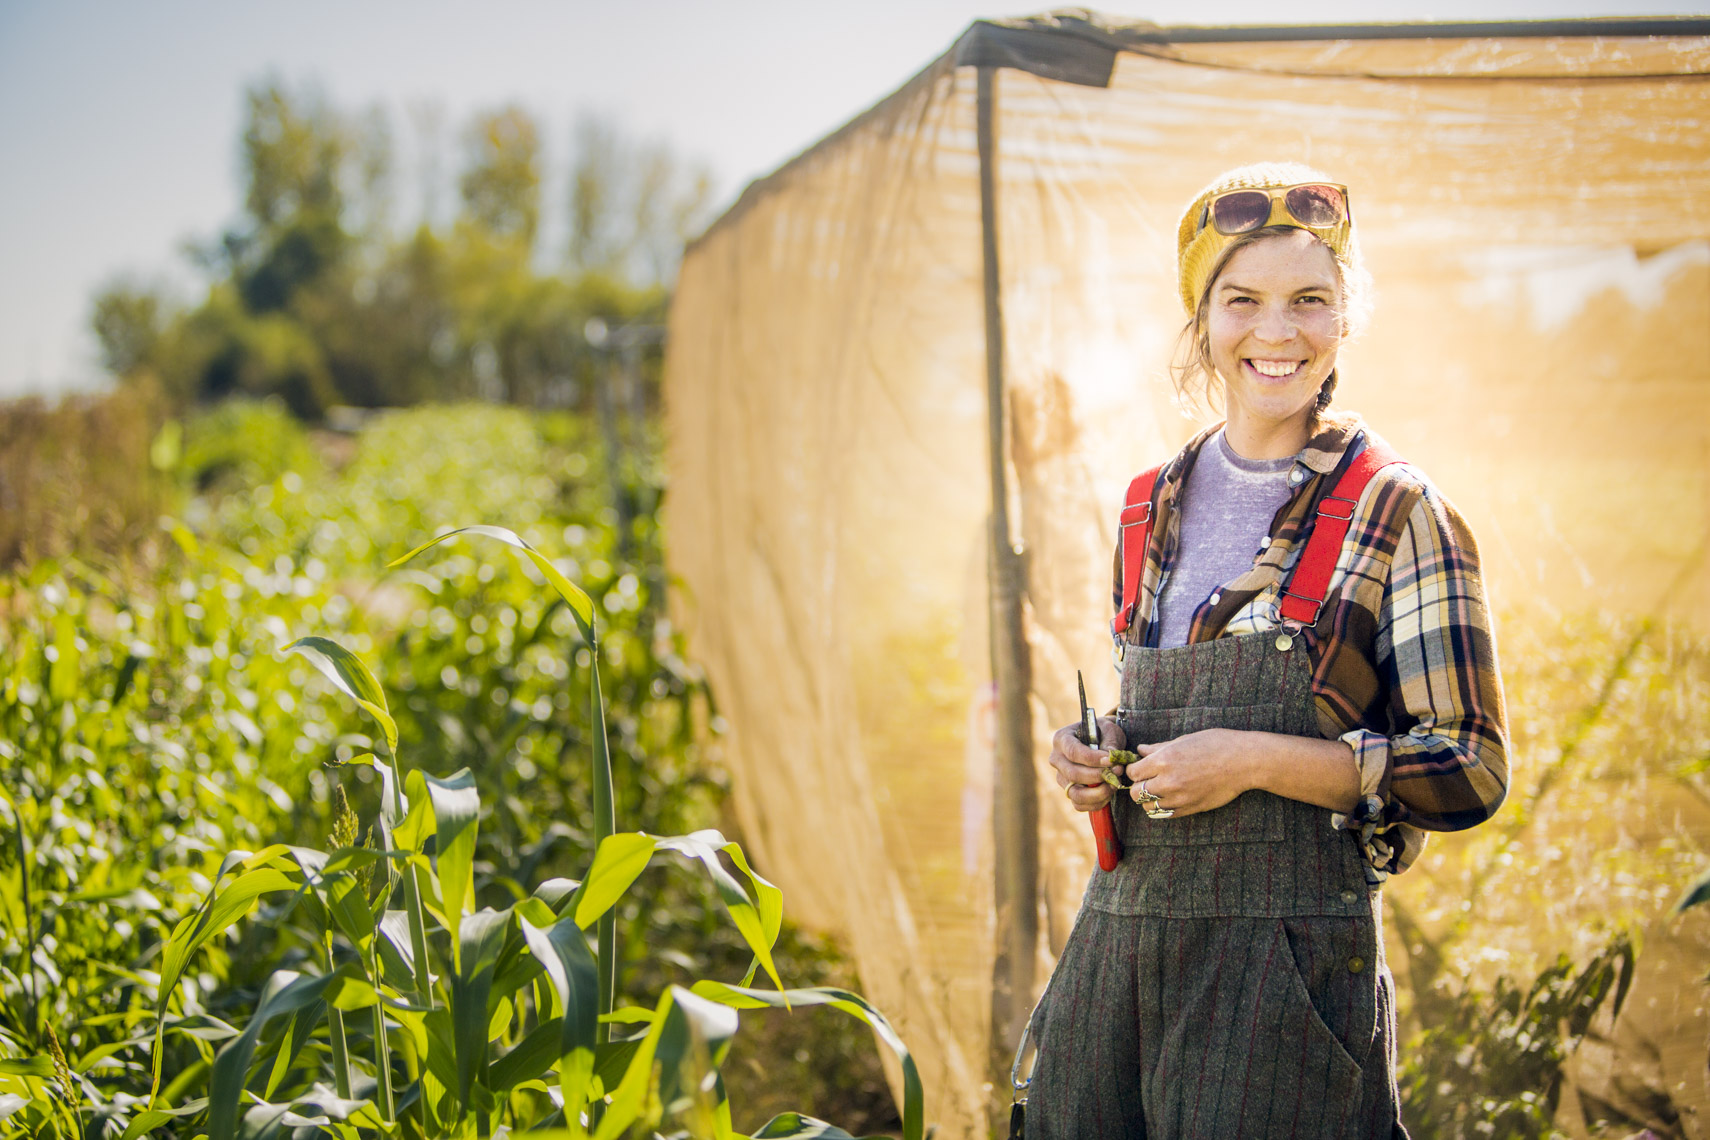 A portrait of a woman working near a farm structure  by Washington DC photographer Ryan Donnell